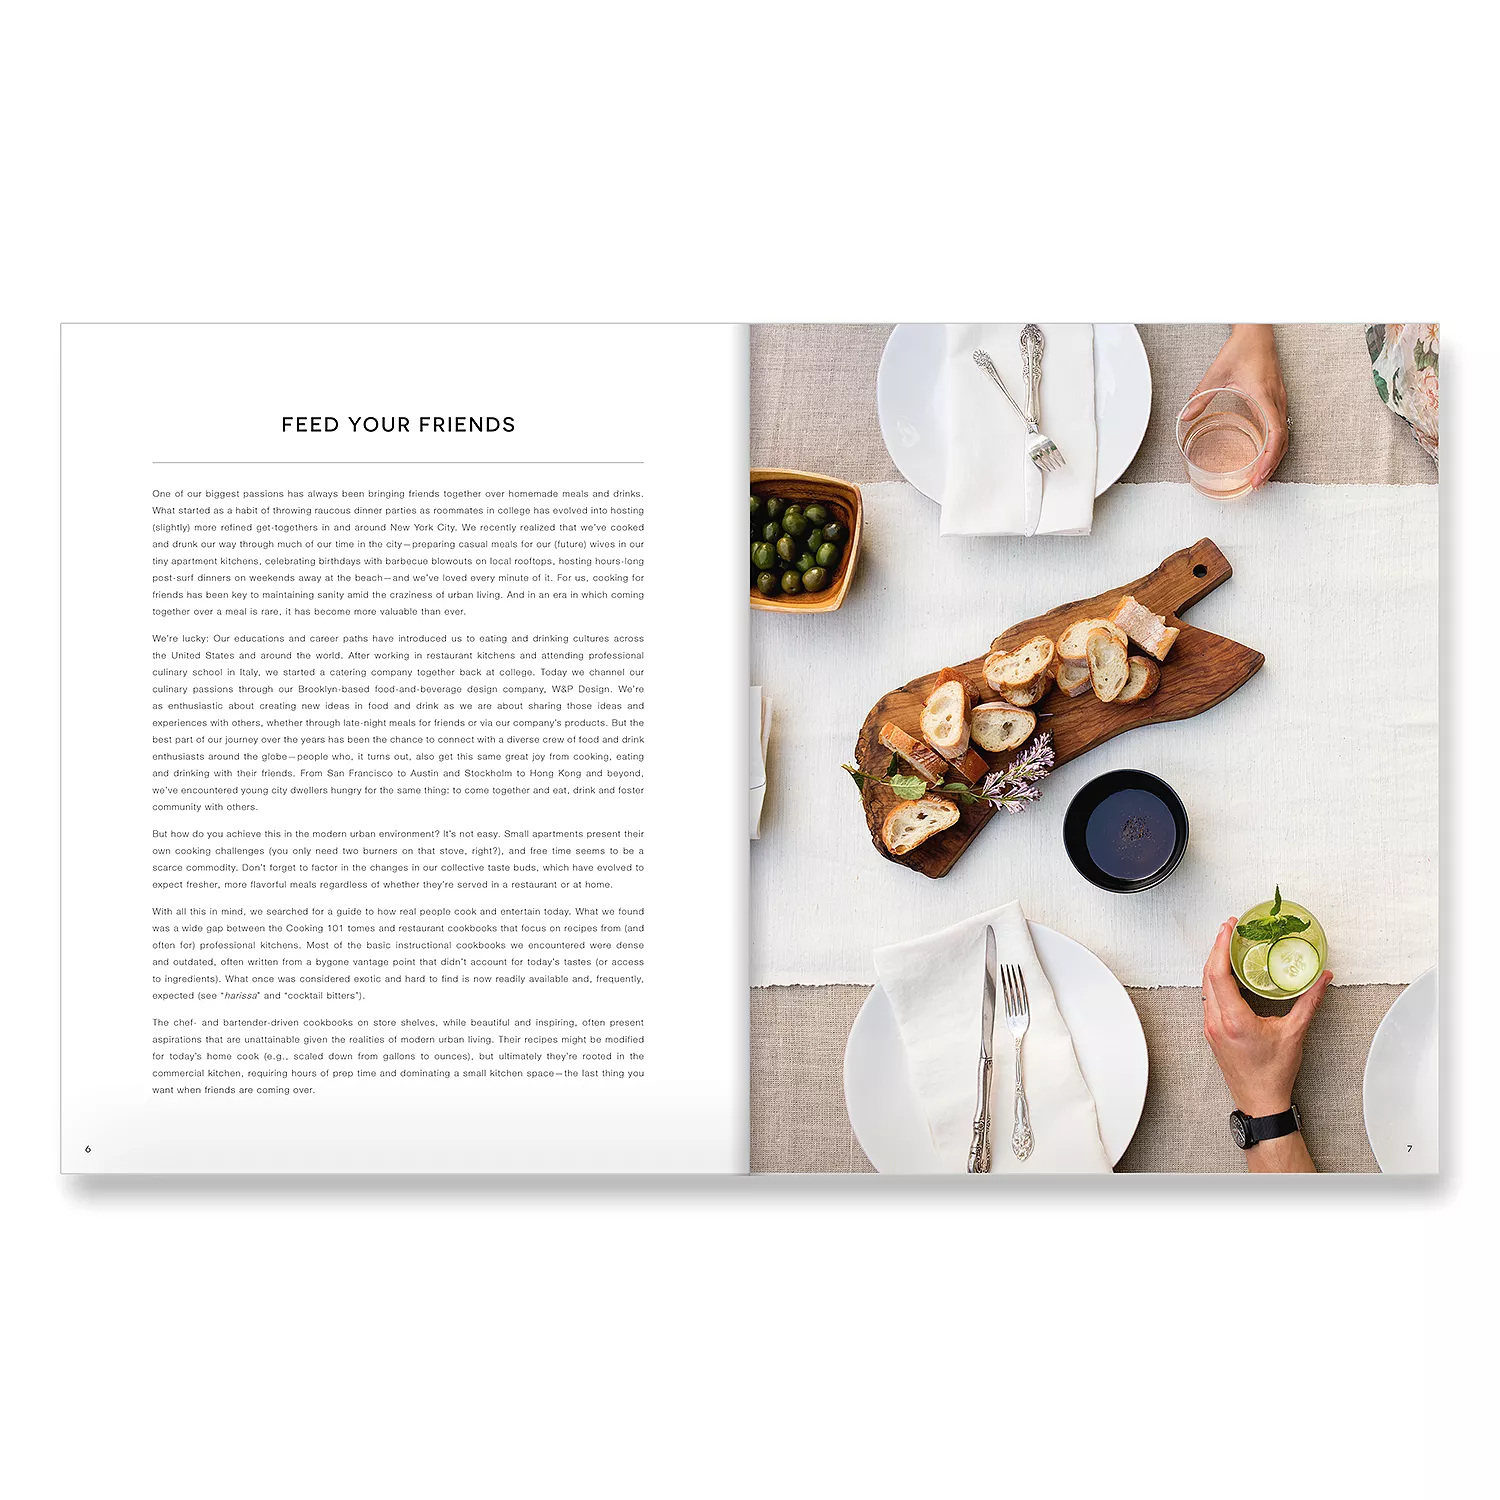 Sur La Table Host: A Modern Guide to Eating, Drinking, and Feeding Your Friends